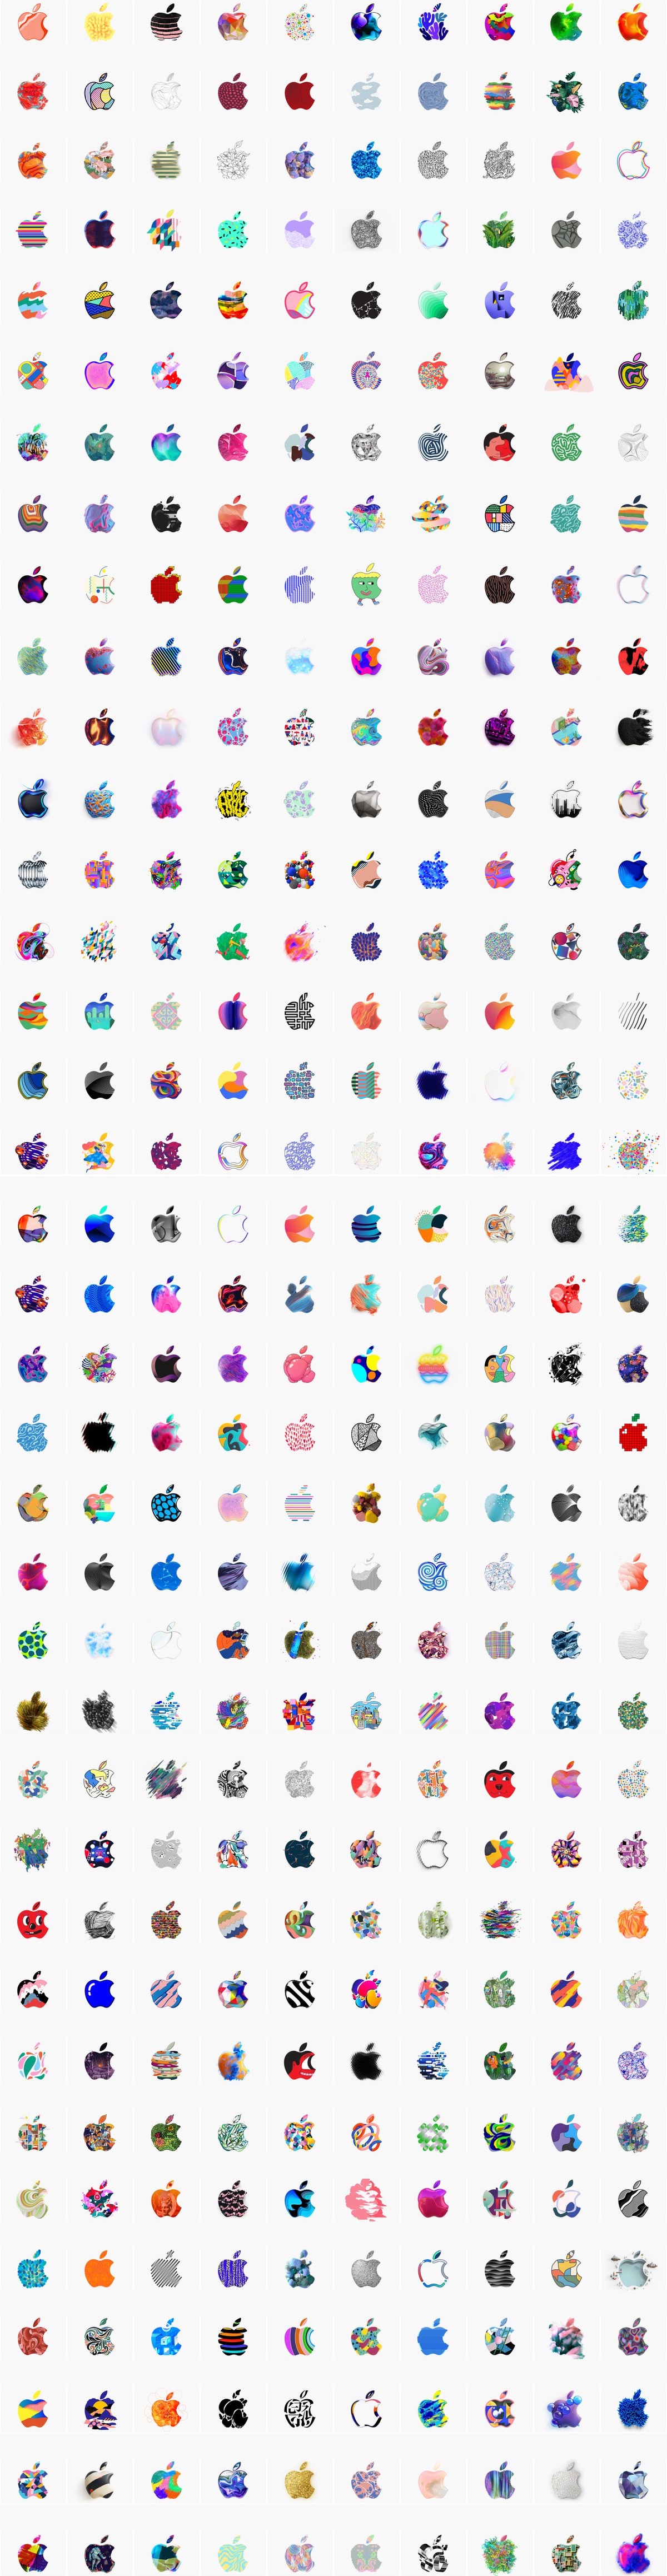 Apple logos for the October special event invitation